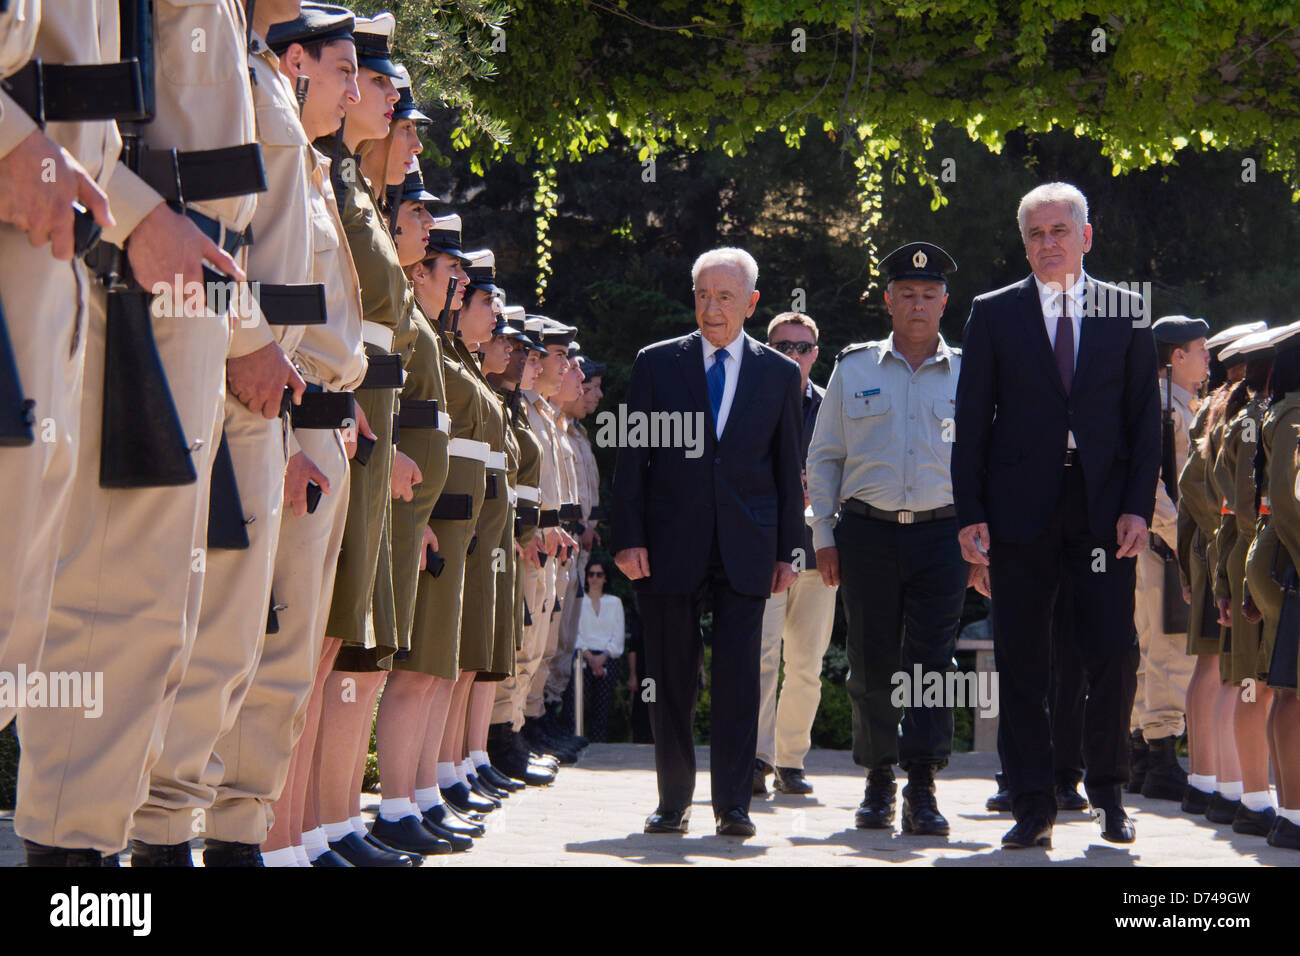 Jerusalem, Israel. 29-April-2013. President of Israel, Shimon Peres, and President of Serbia, Tomislav Nicolic, survey an IDF honor guard at a welcoming ceremony for the Serbian President. Jerusalem, Israel. 29-April-2013.  President Shimon Peres hosts an official state welcome reception for the President of Serbia, Tomislav Nicolic, at the President's Residence. The two discuss strengthening strategic relations and deepening economic, trade and diplomatic cooperation.Credit: Nir Alon/Alamy Live News Stock Photo